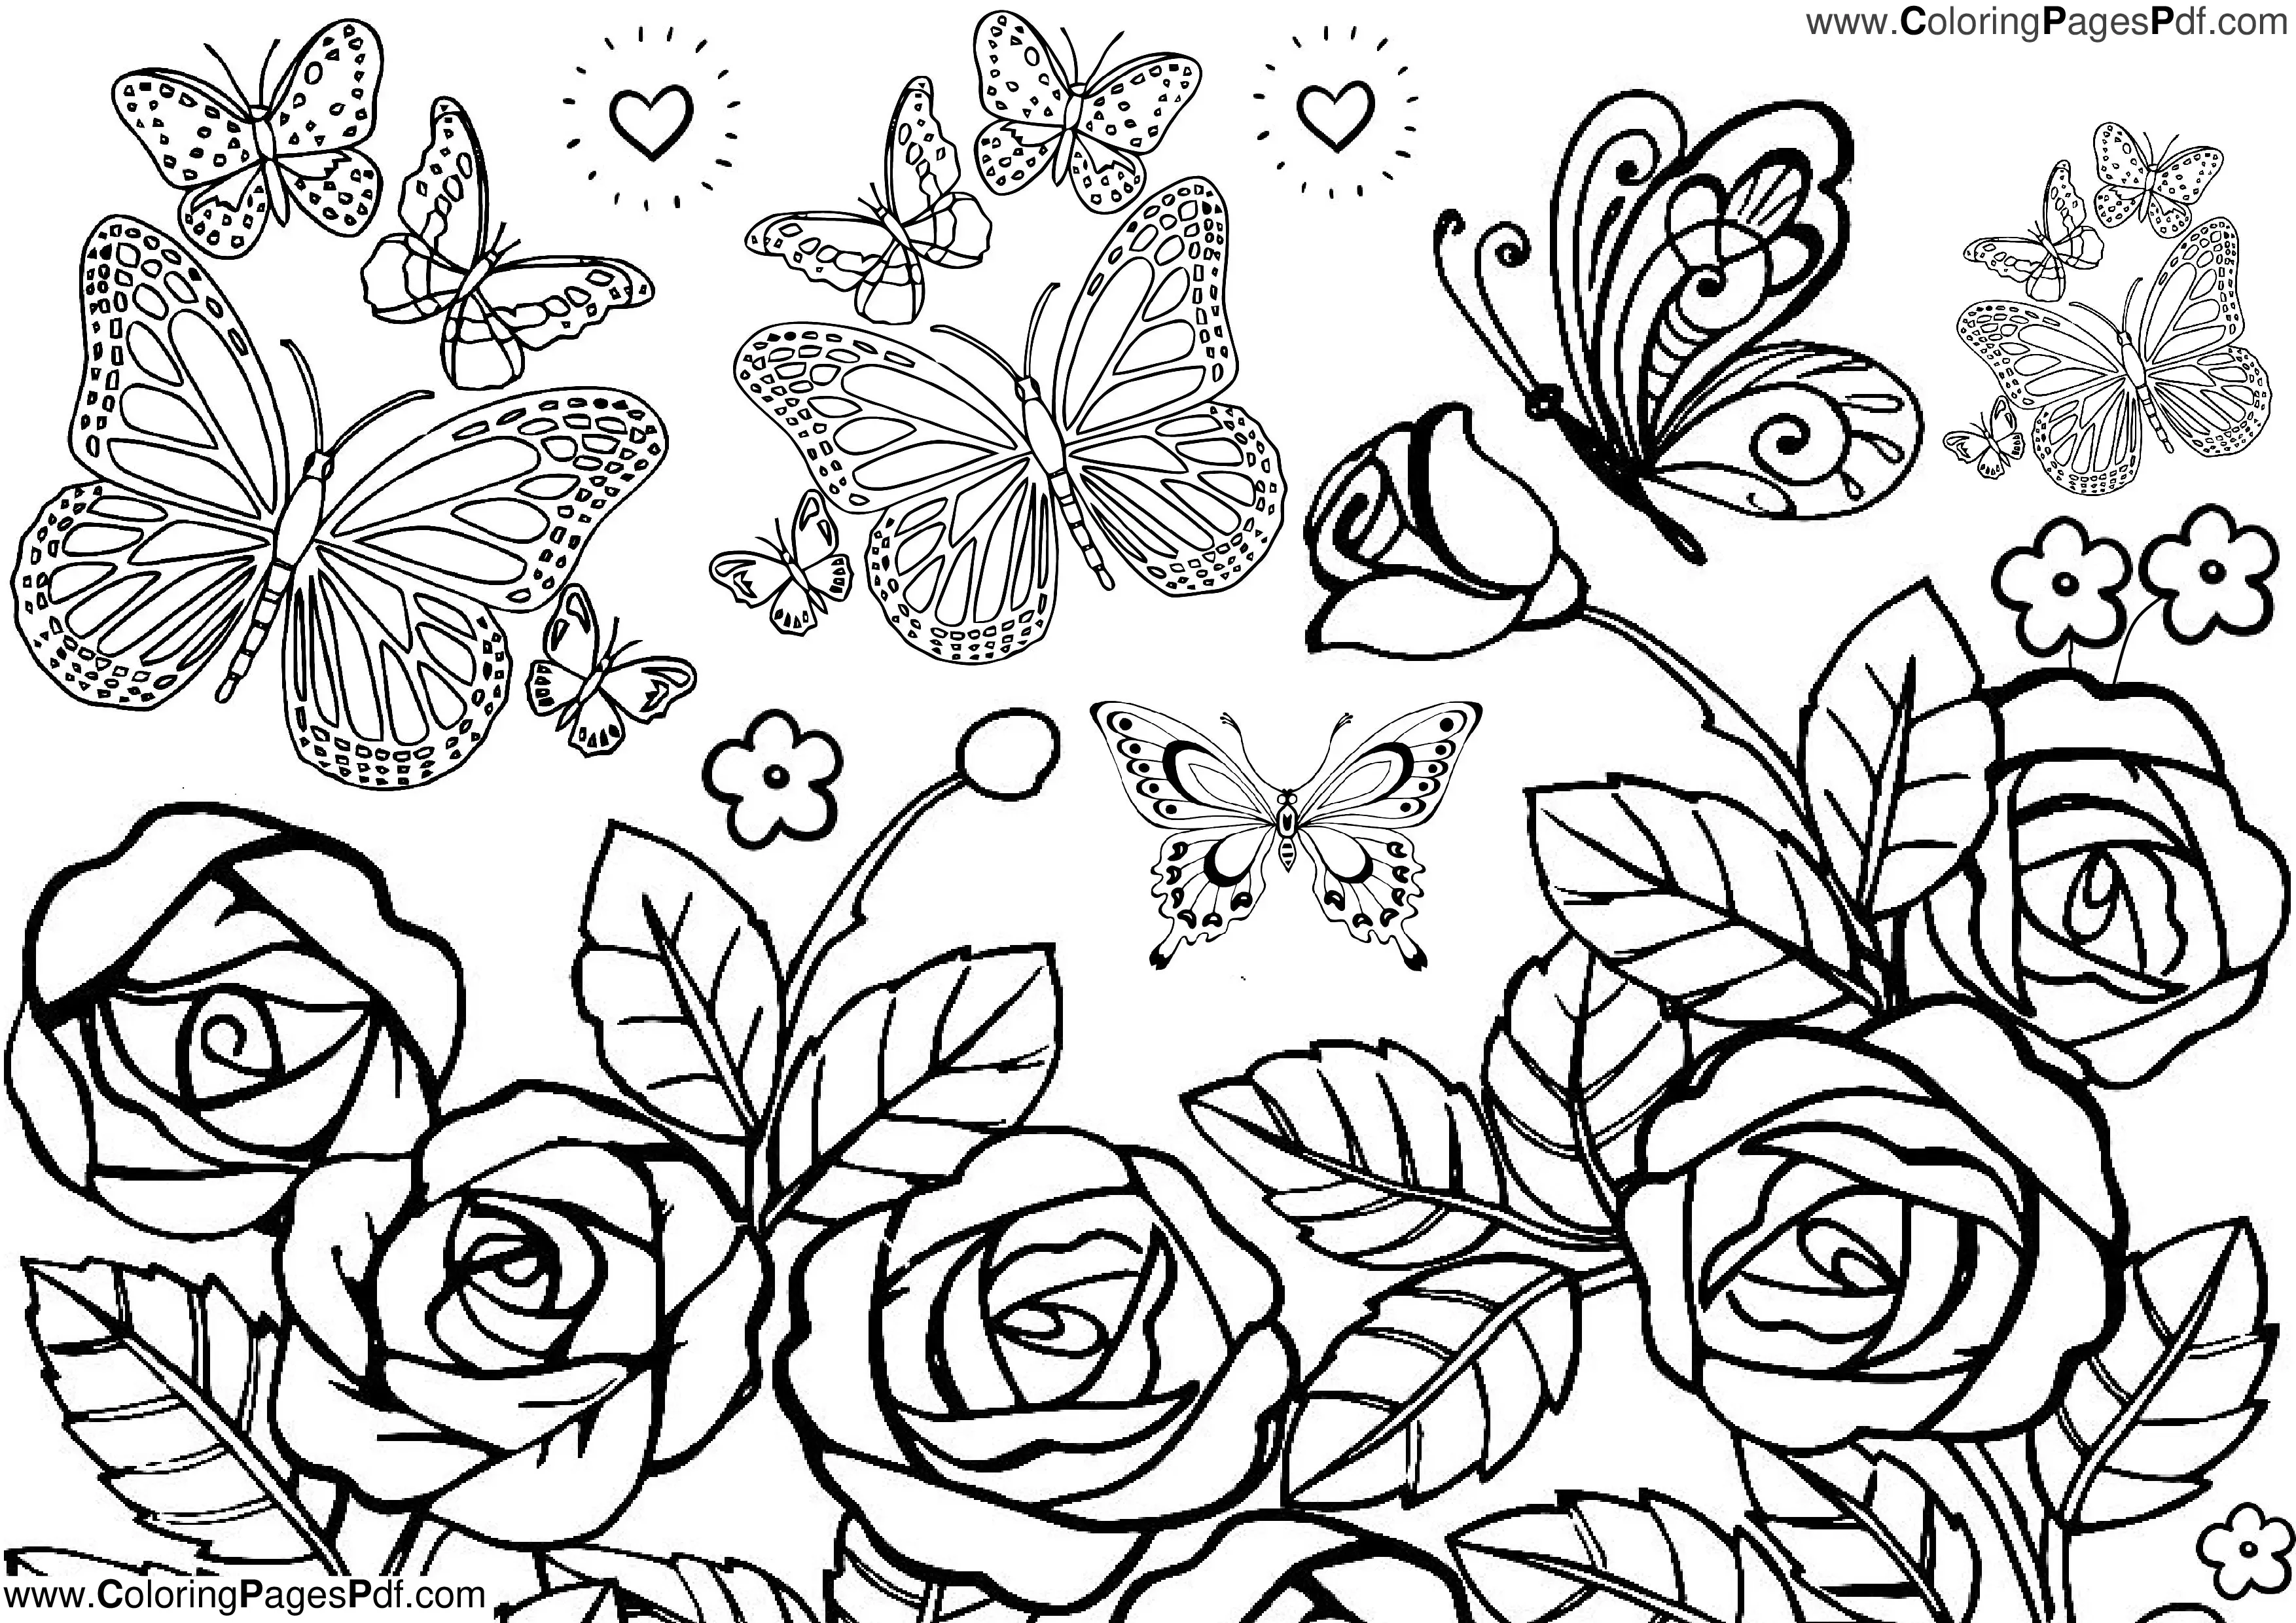 Coloring pages of roses and butterflies